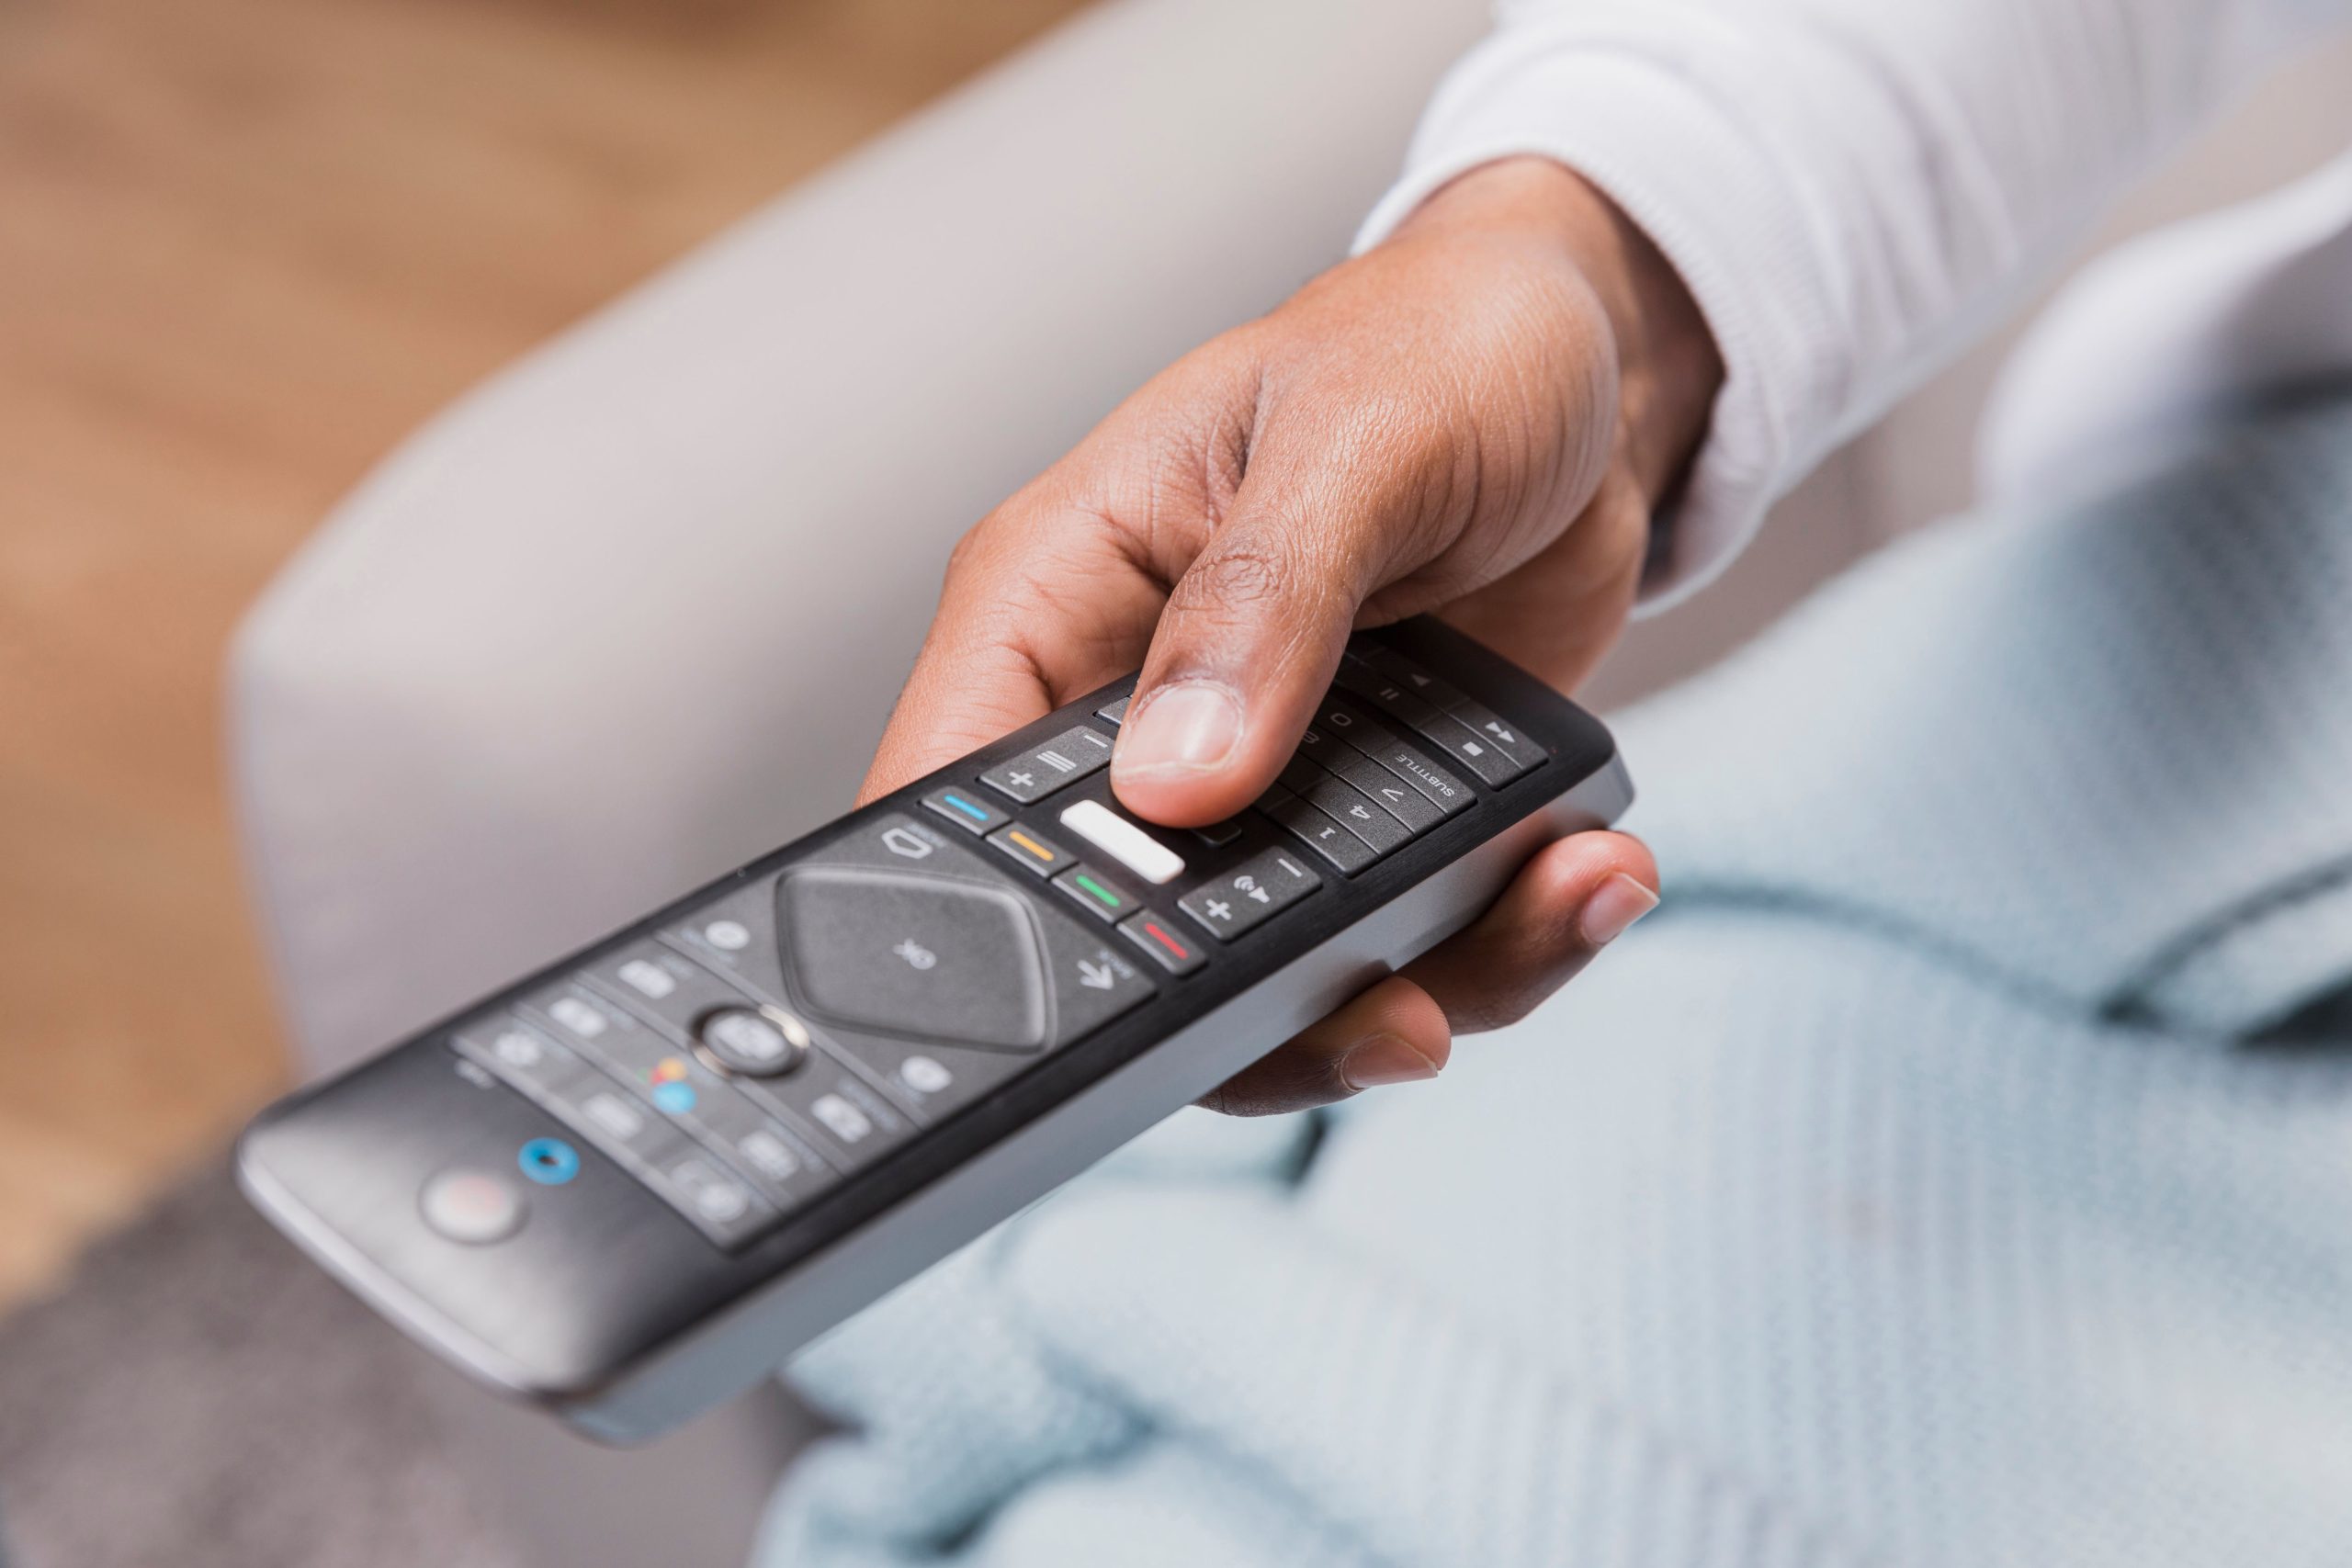 How to Connect a Universal Remote to a TV